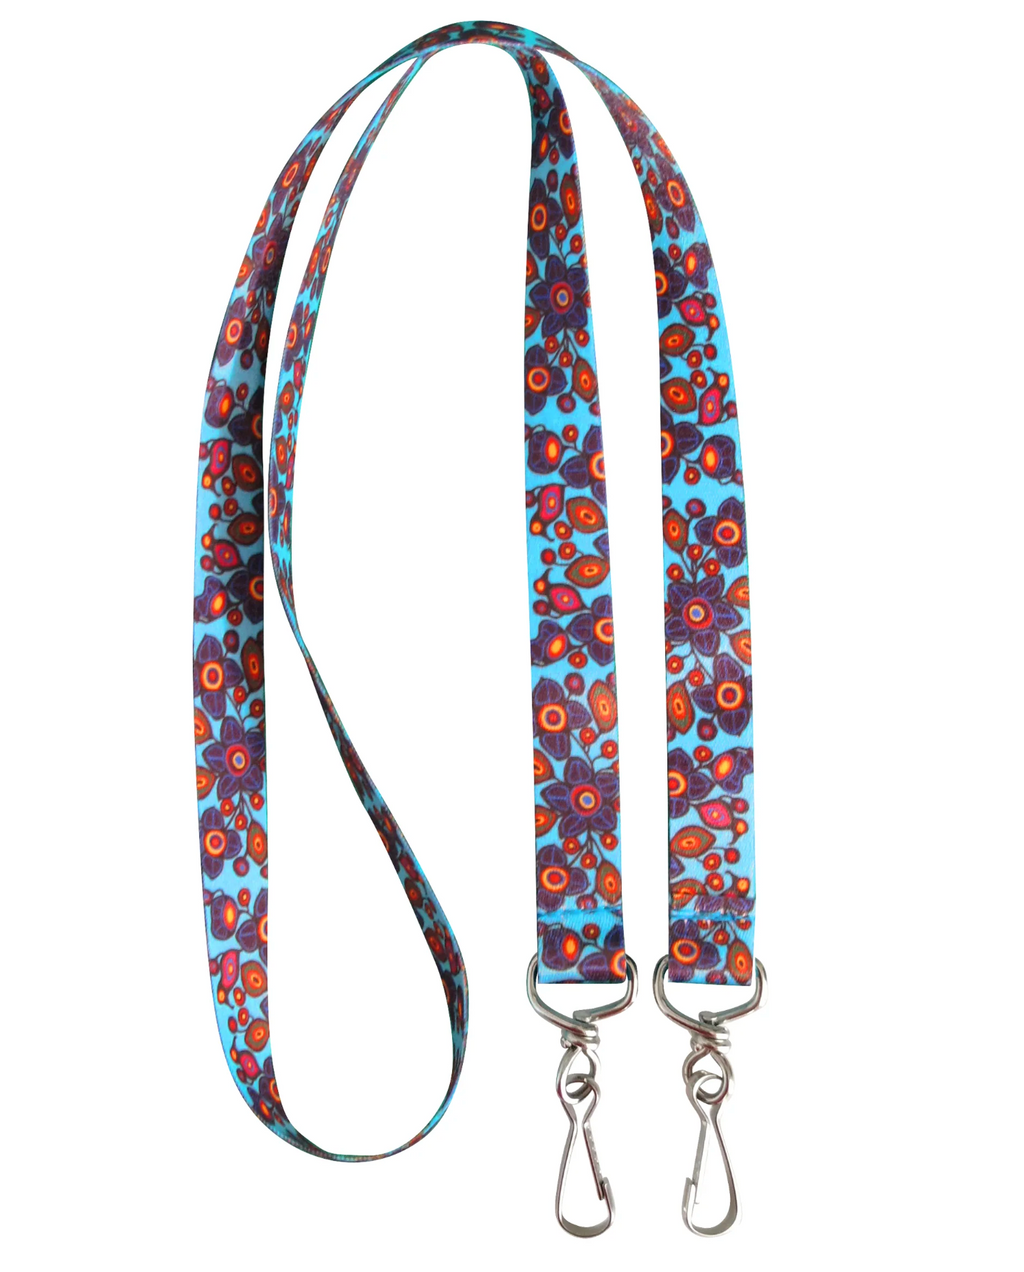 Norval Morrisseau Flowers and Birds Lanyard